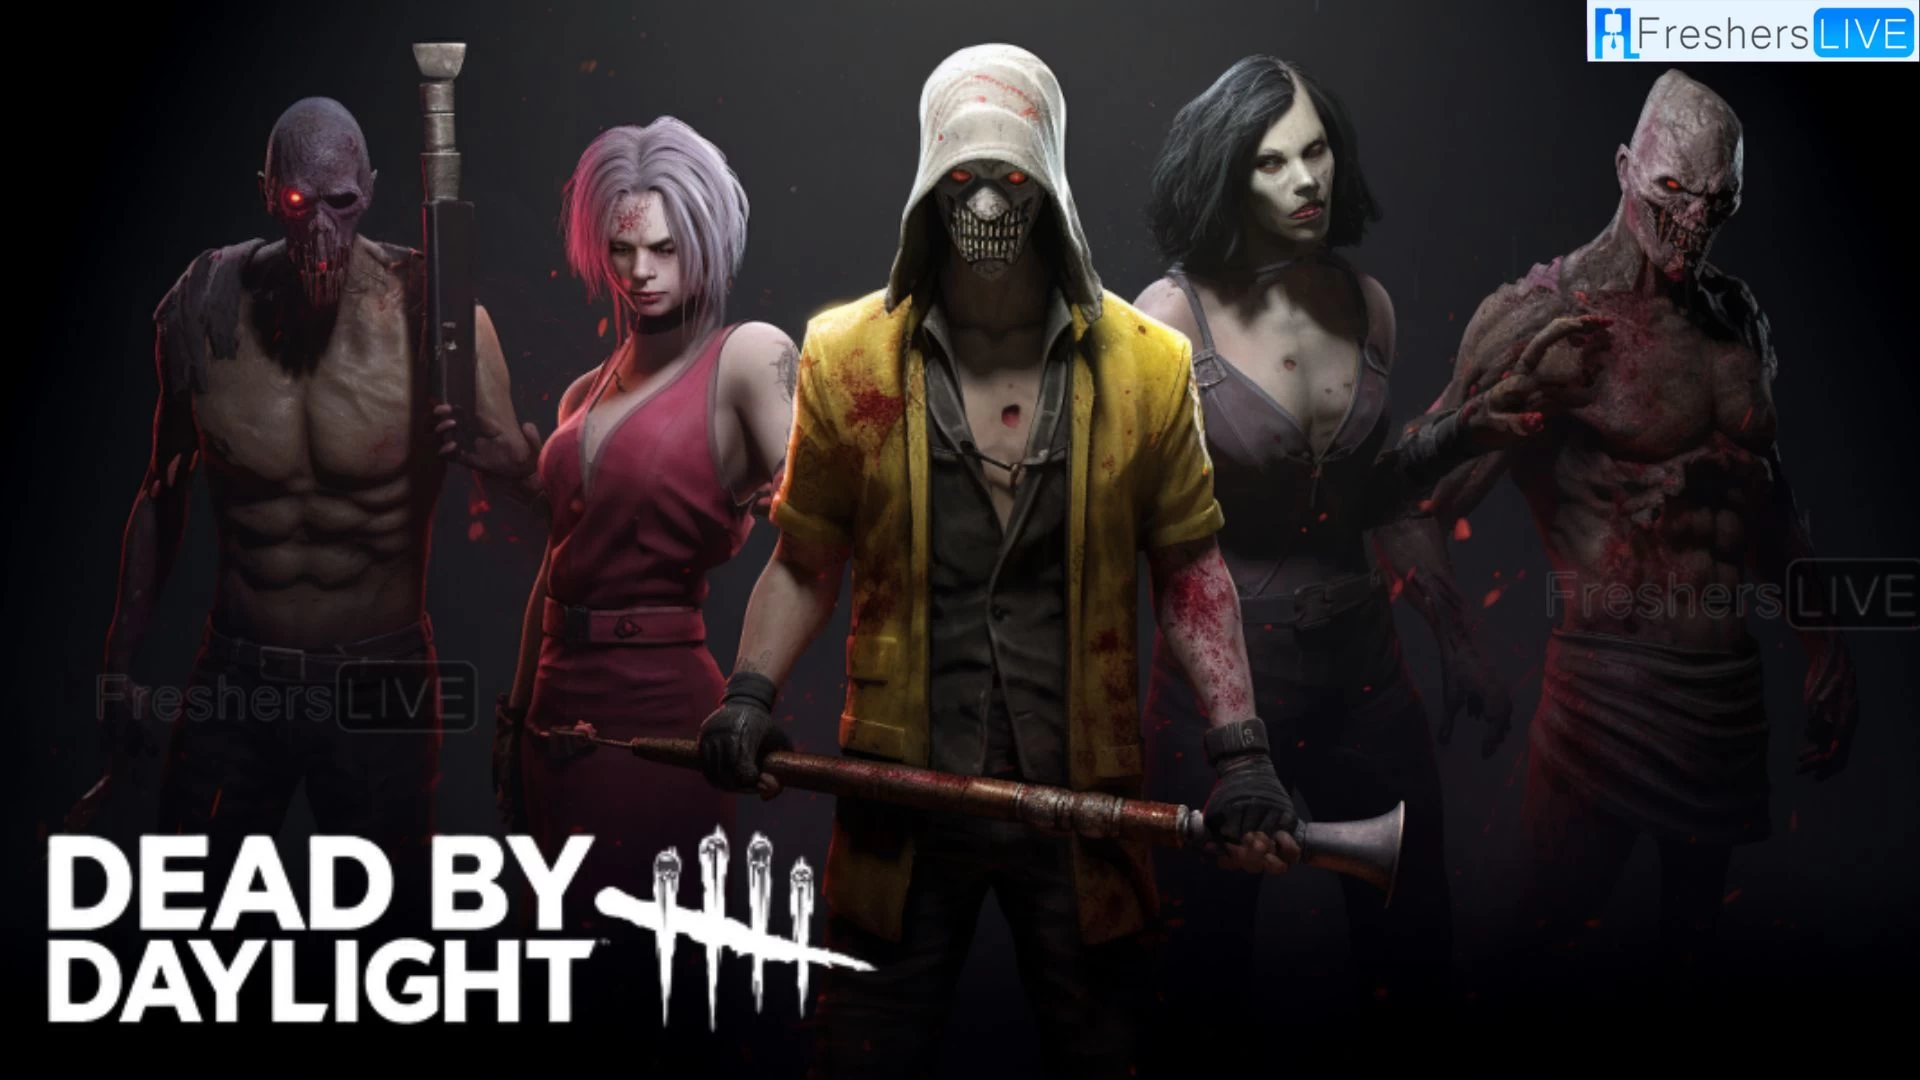 Dead by Daylight Update 2.95 for Version 7.2.3: Fixes and Improvements